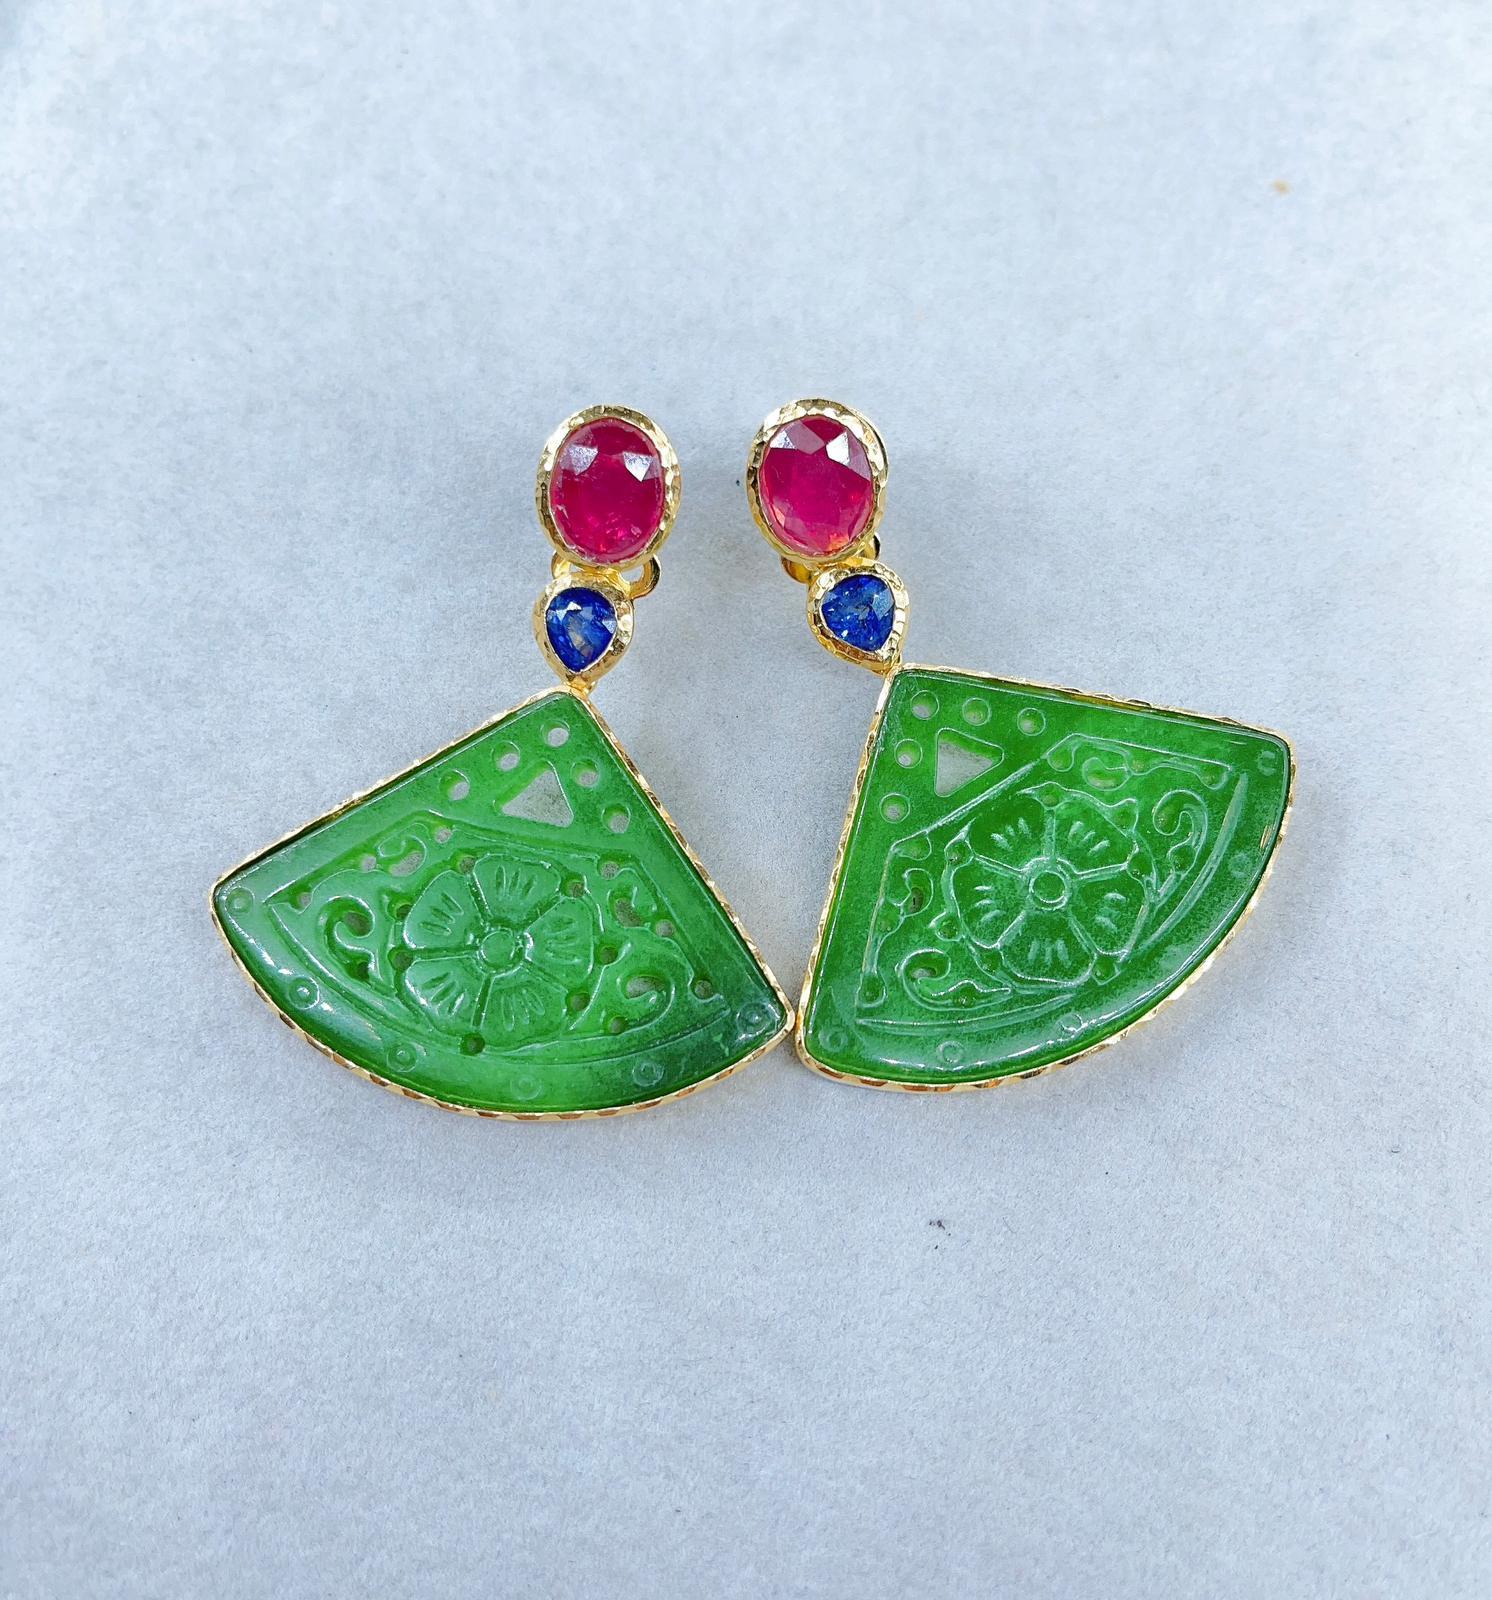 Bochic “Orient” Green Jade Earrings & Blue Sapphire & Ruby Set 22K Gold, Silver 
Bochic “Orient” Multi Natural Gem Earrings 
Natural Ruby, Color - Red - 5 Carats 
Shape - Cabochon 
Natural Sapphire, Color - Blue - 3 Carats 
Shape - Cabochon
Set in